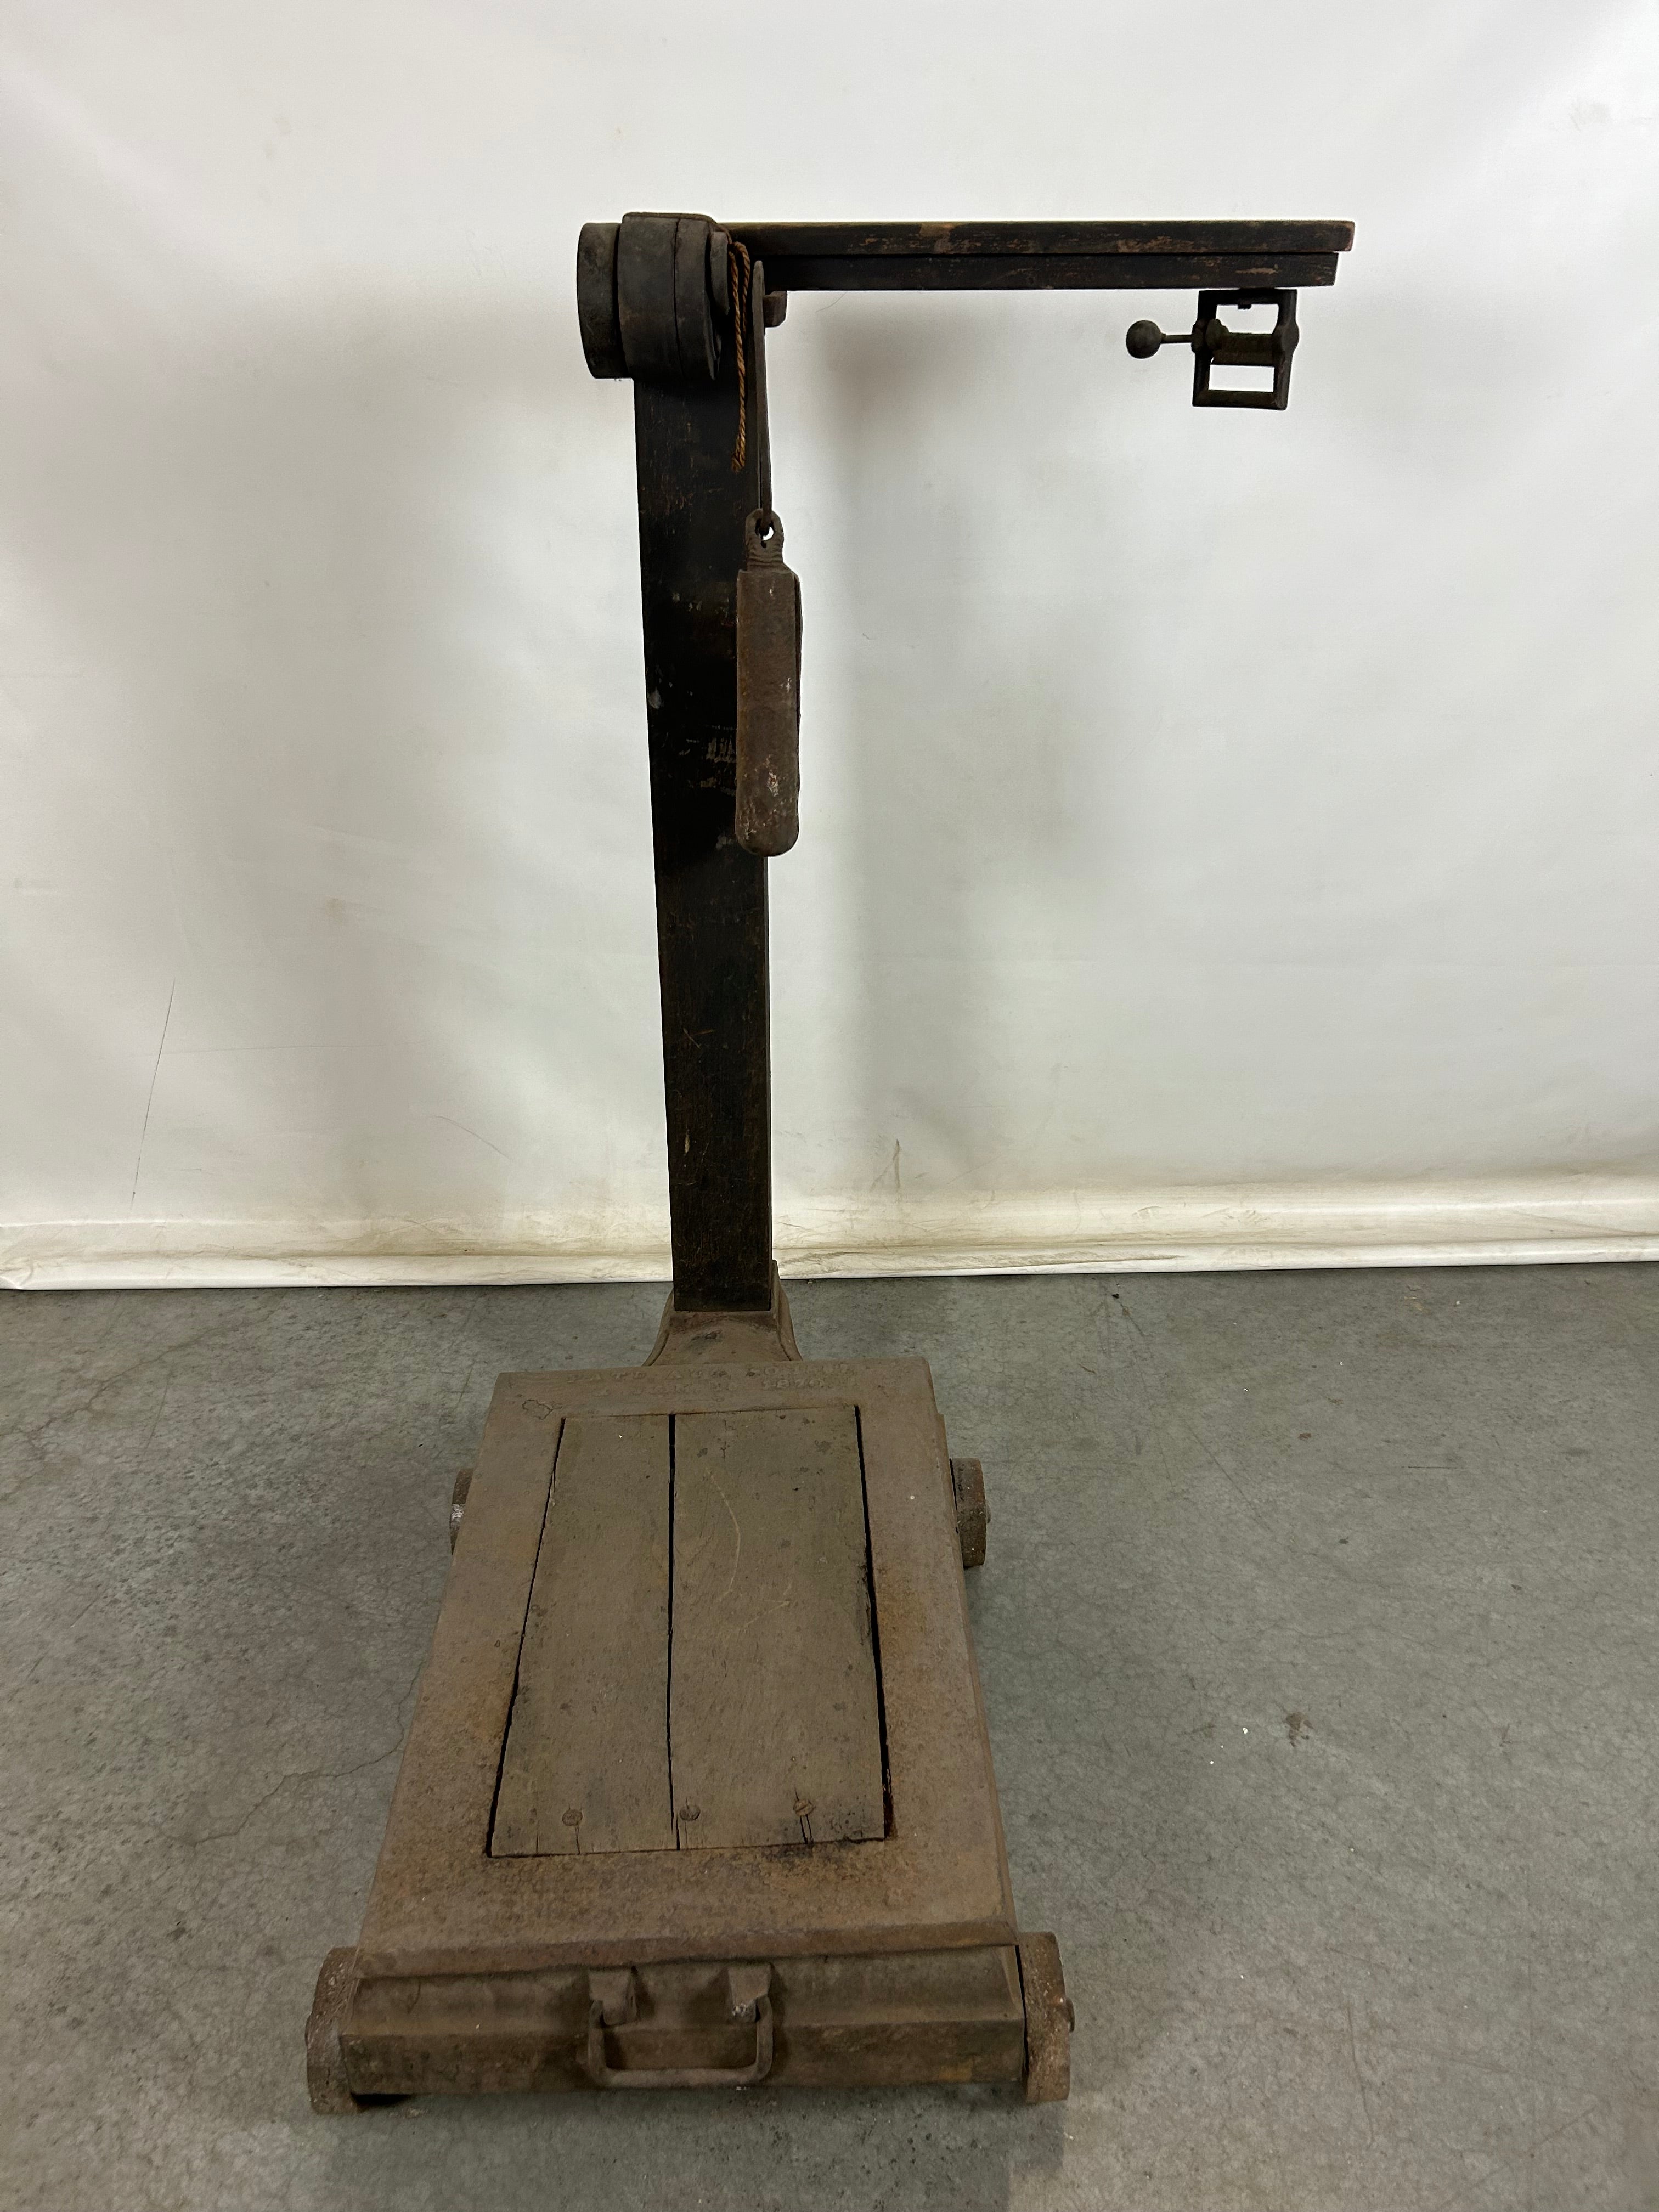 Antique Fairbanks rolling 500 lb. grain scale with weights